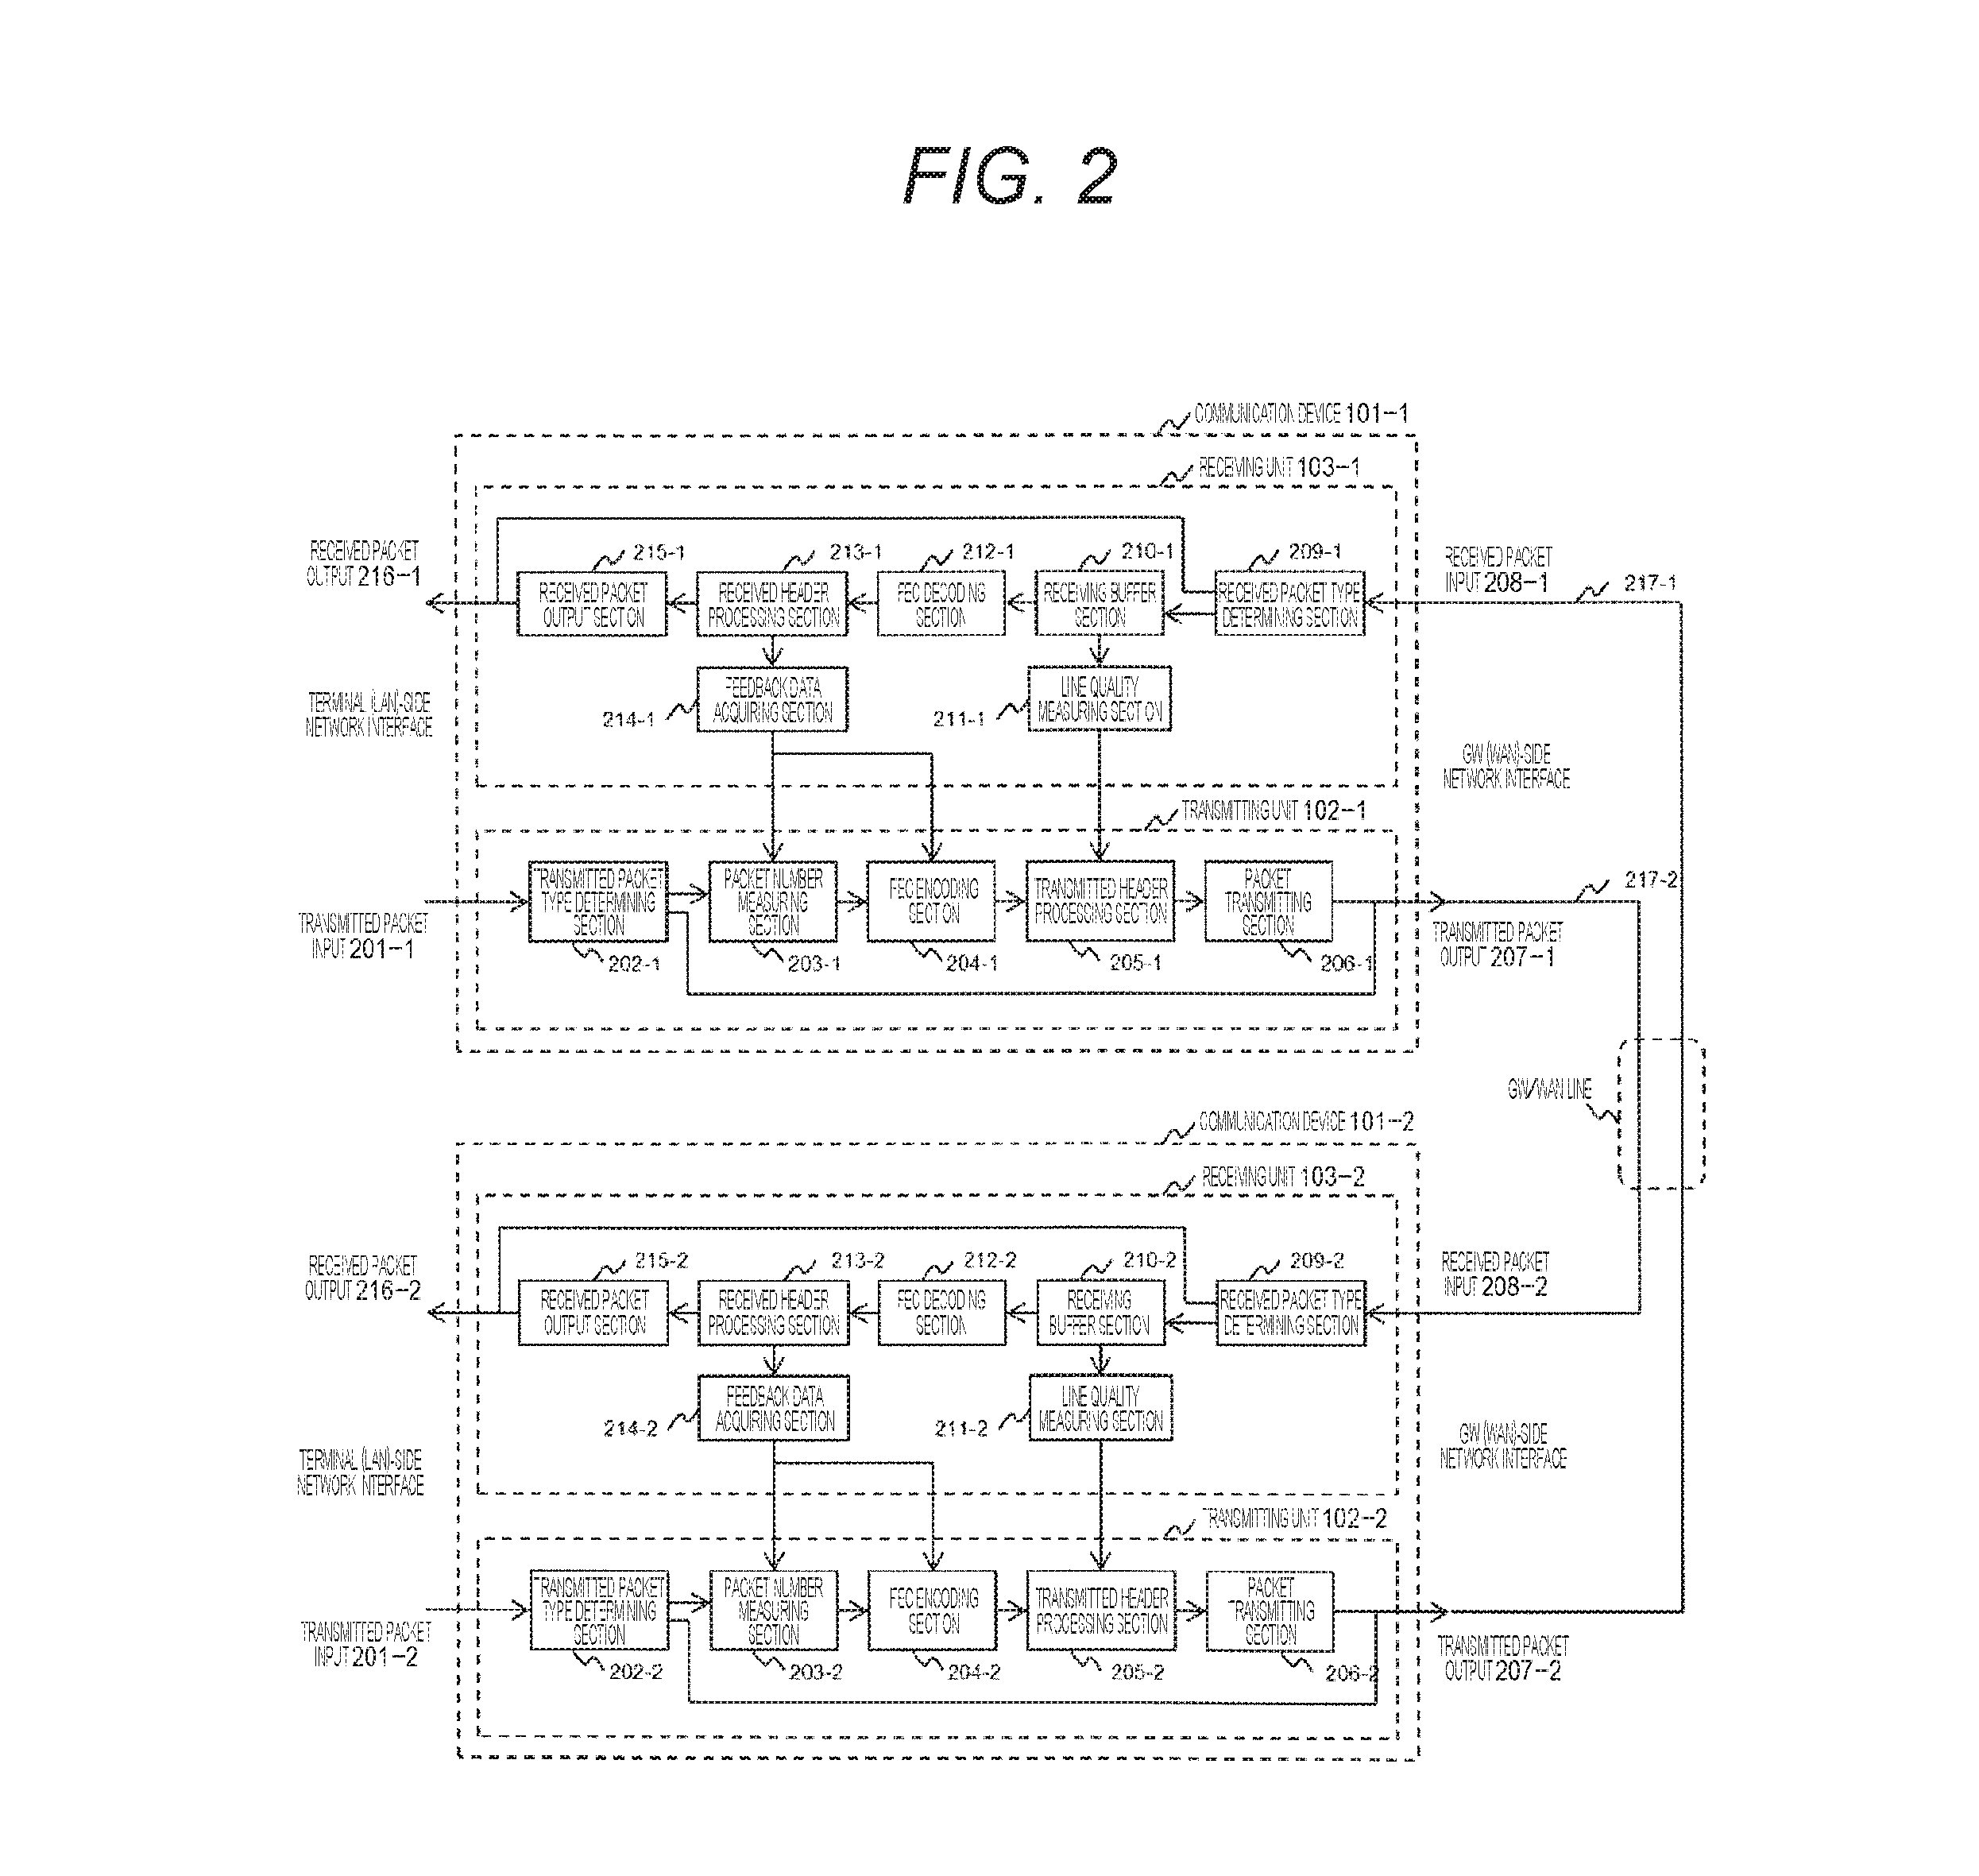 Communication Device, System and Method